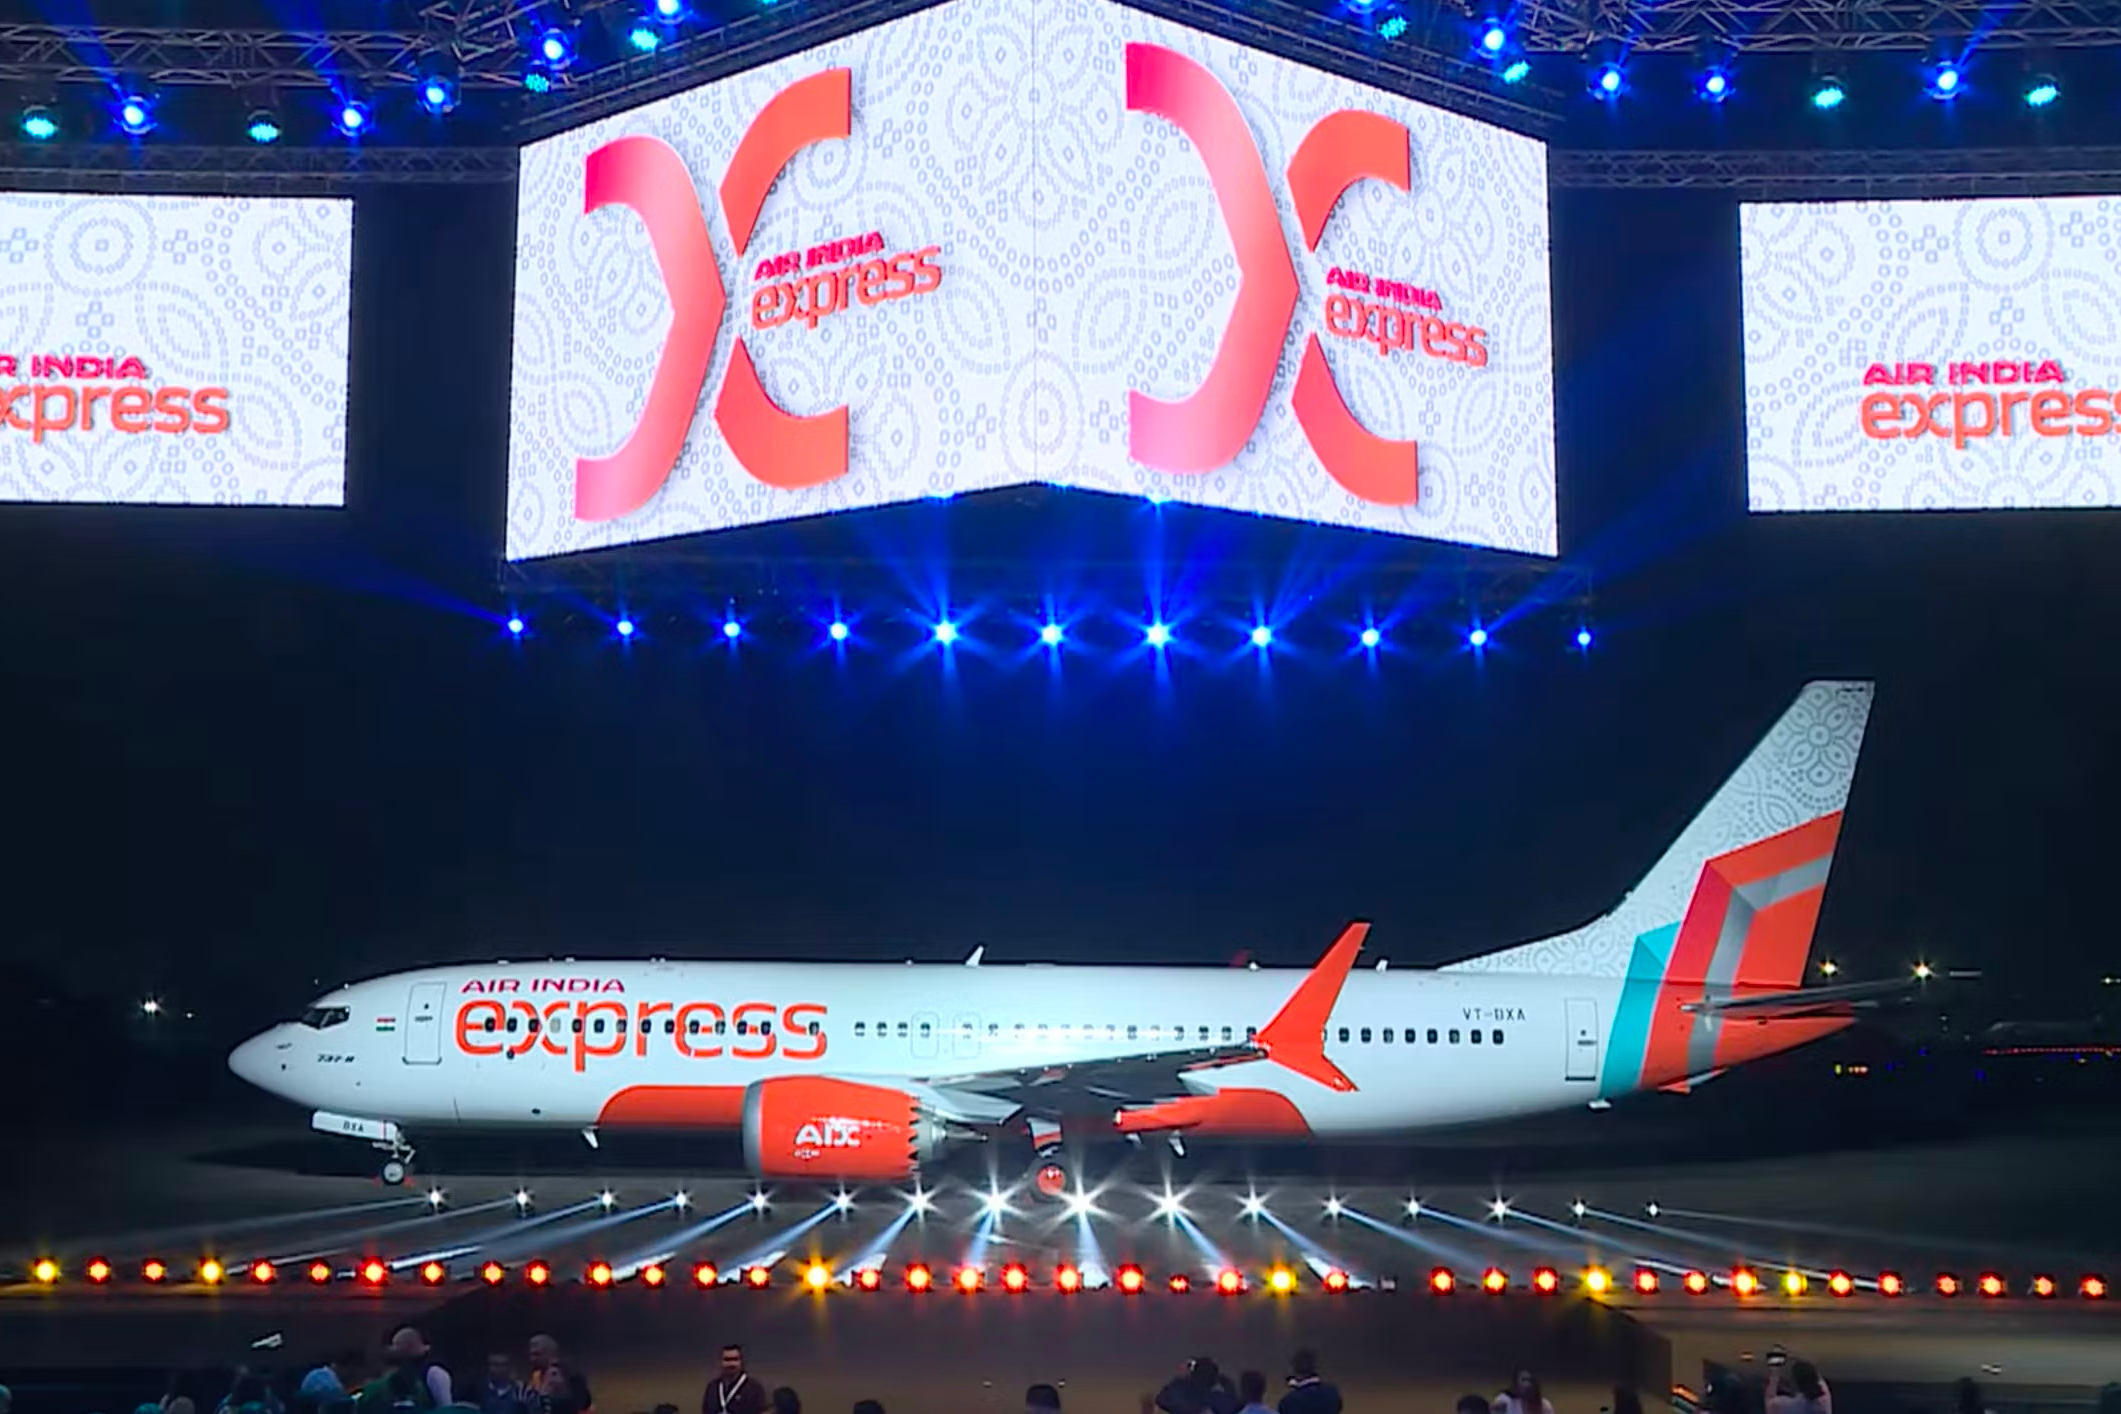 Air India Express new branding reveal Boeing 737 MAX